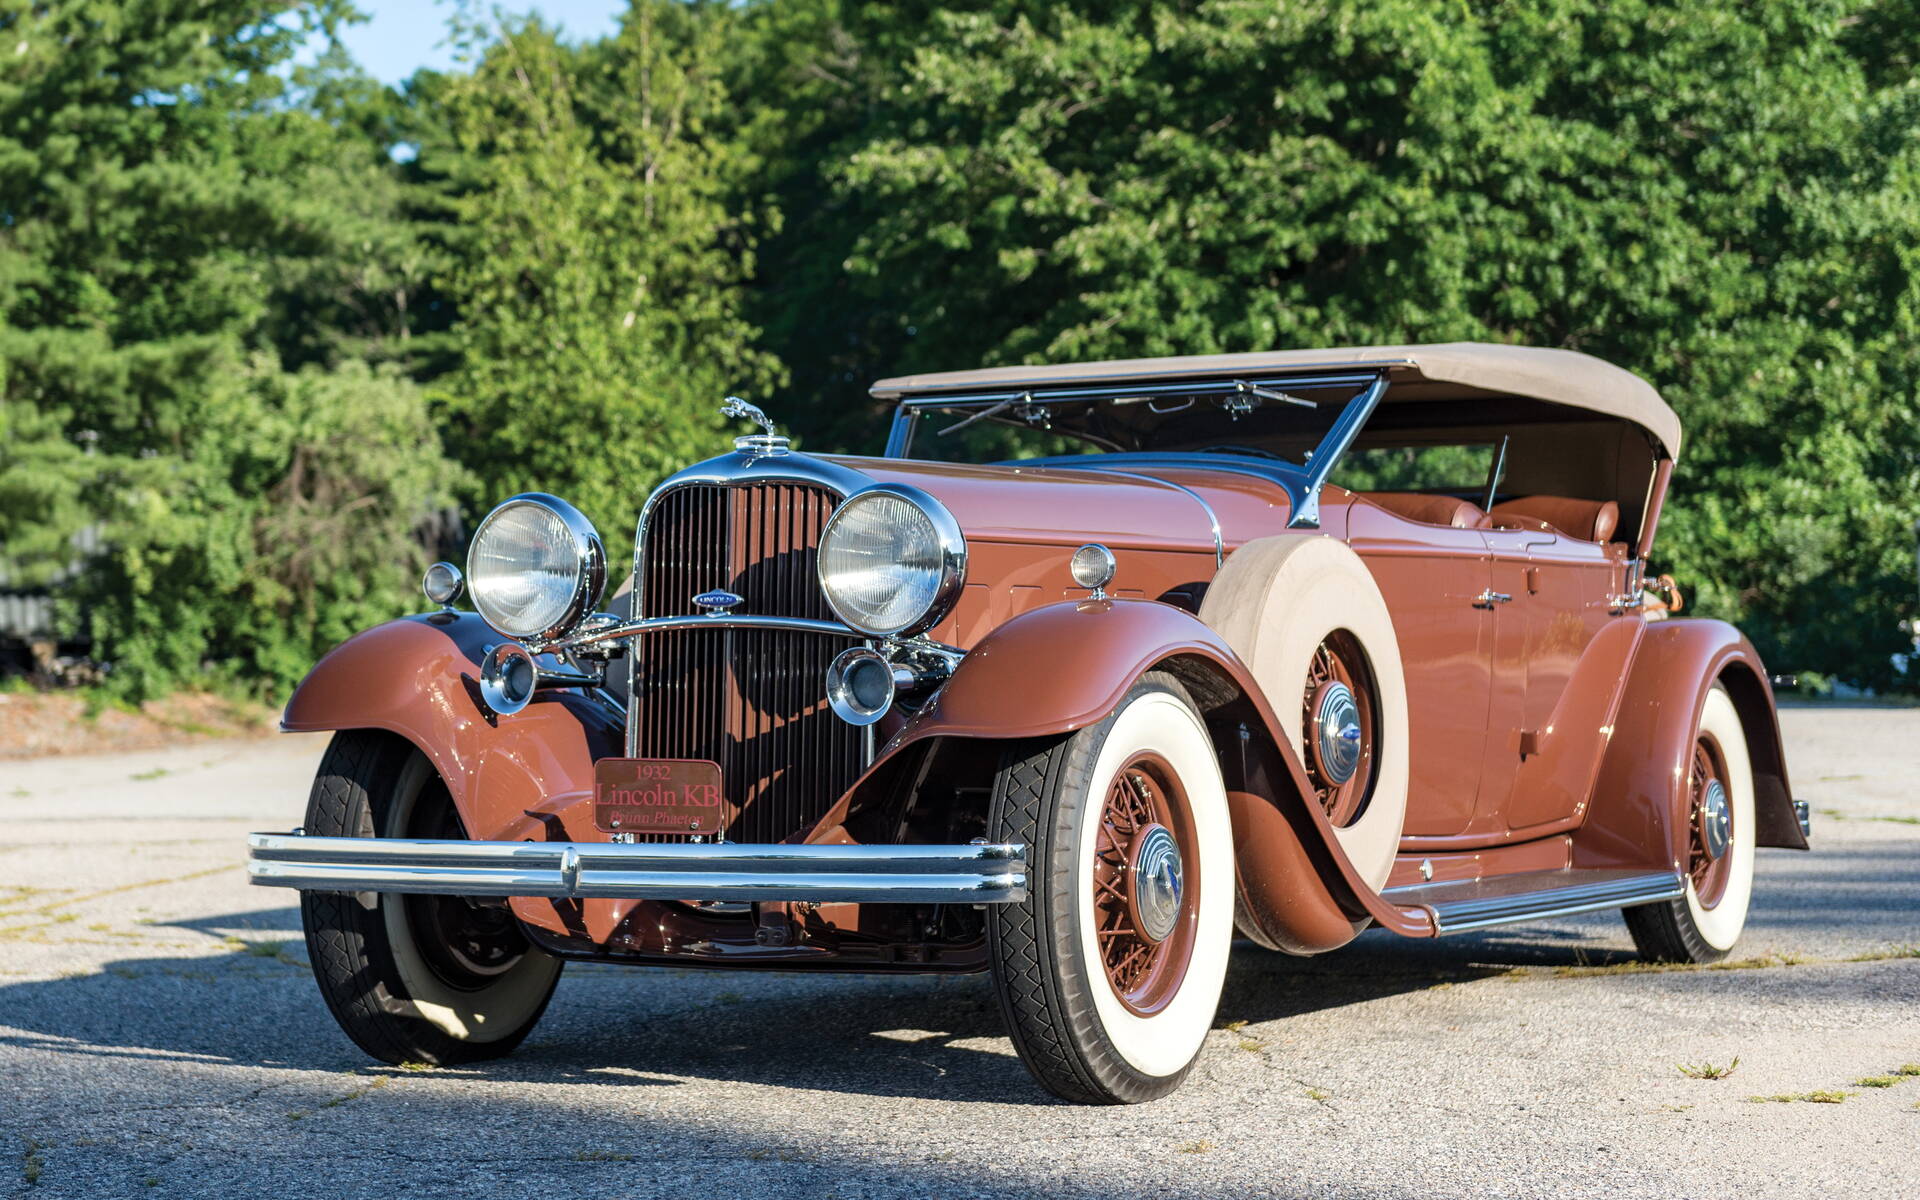 <p>1932 Lincoln Model K, which replaced the Model L.</p>